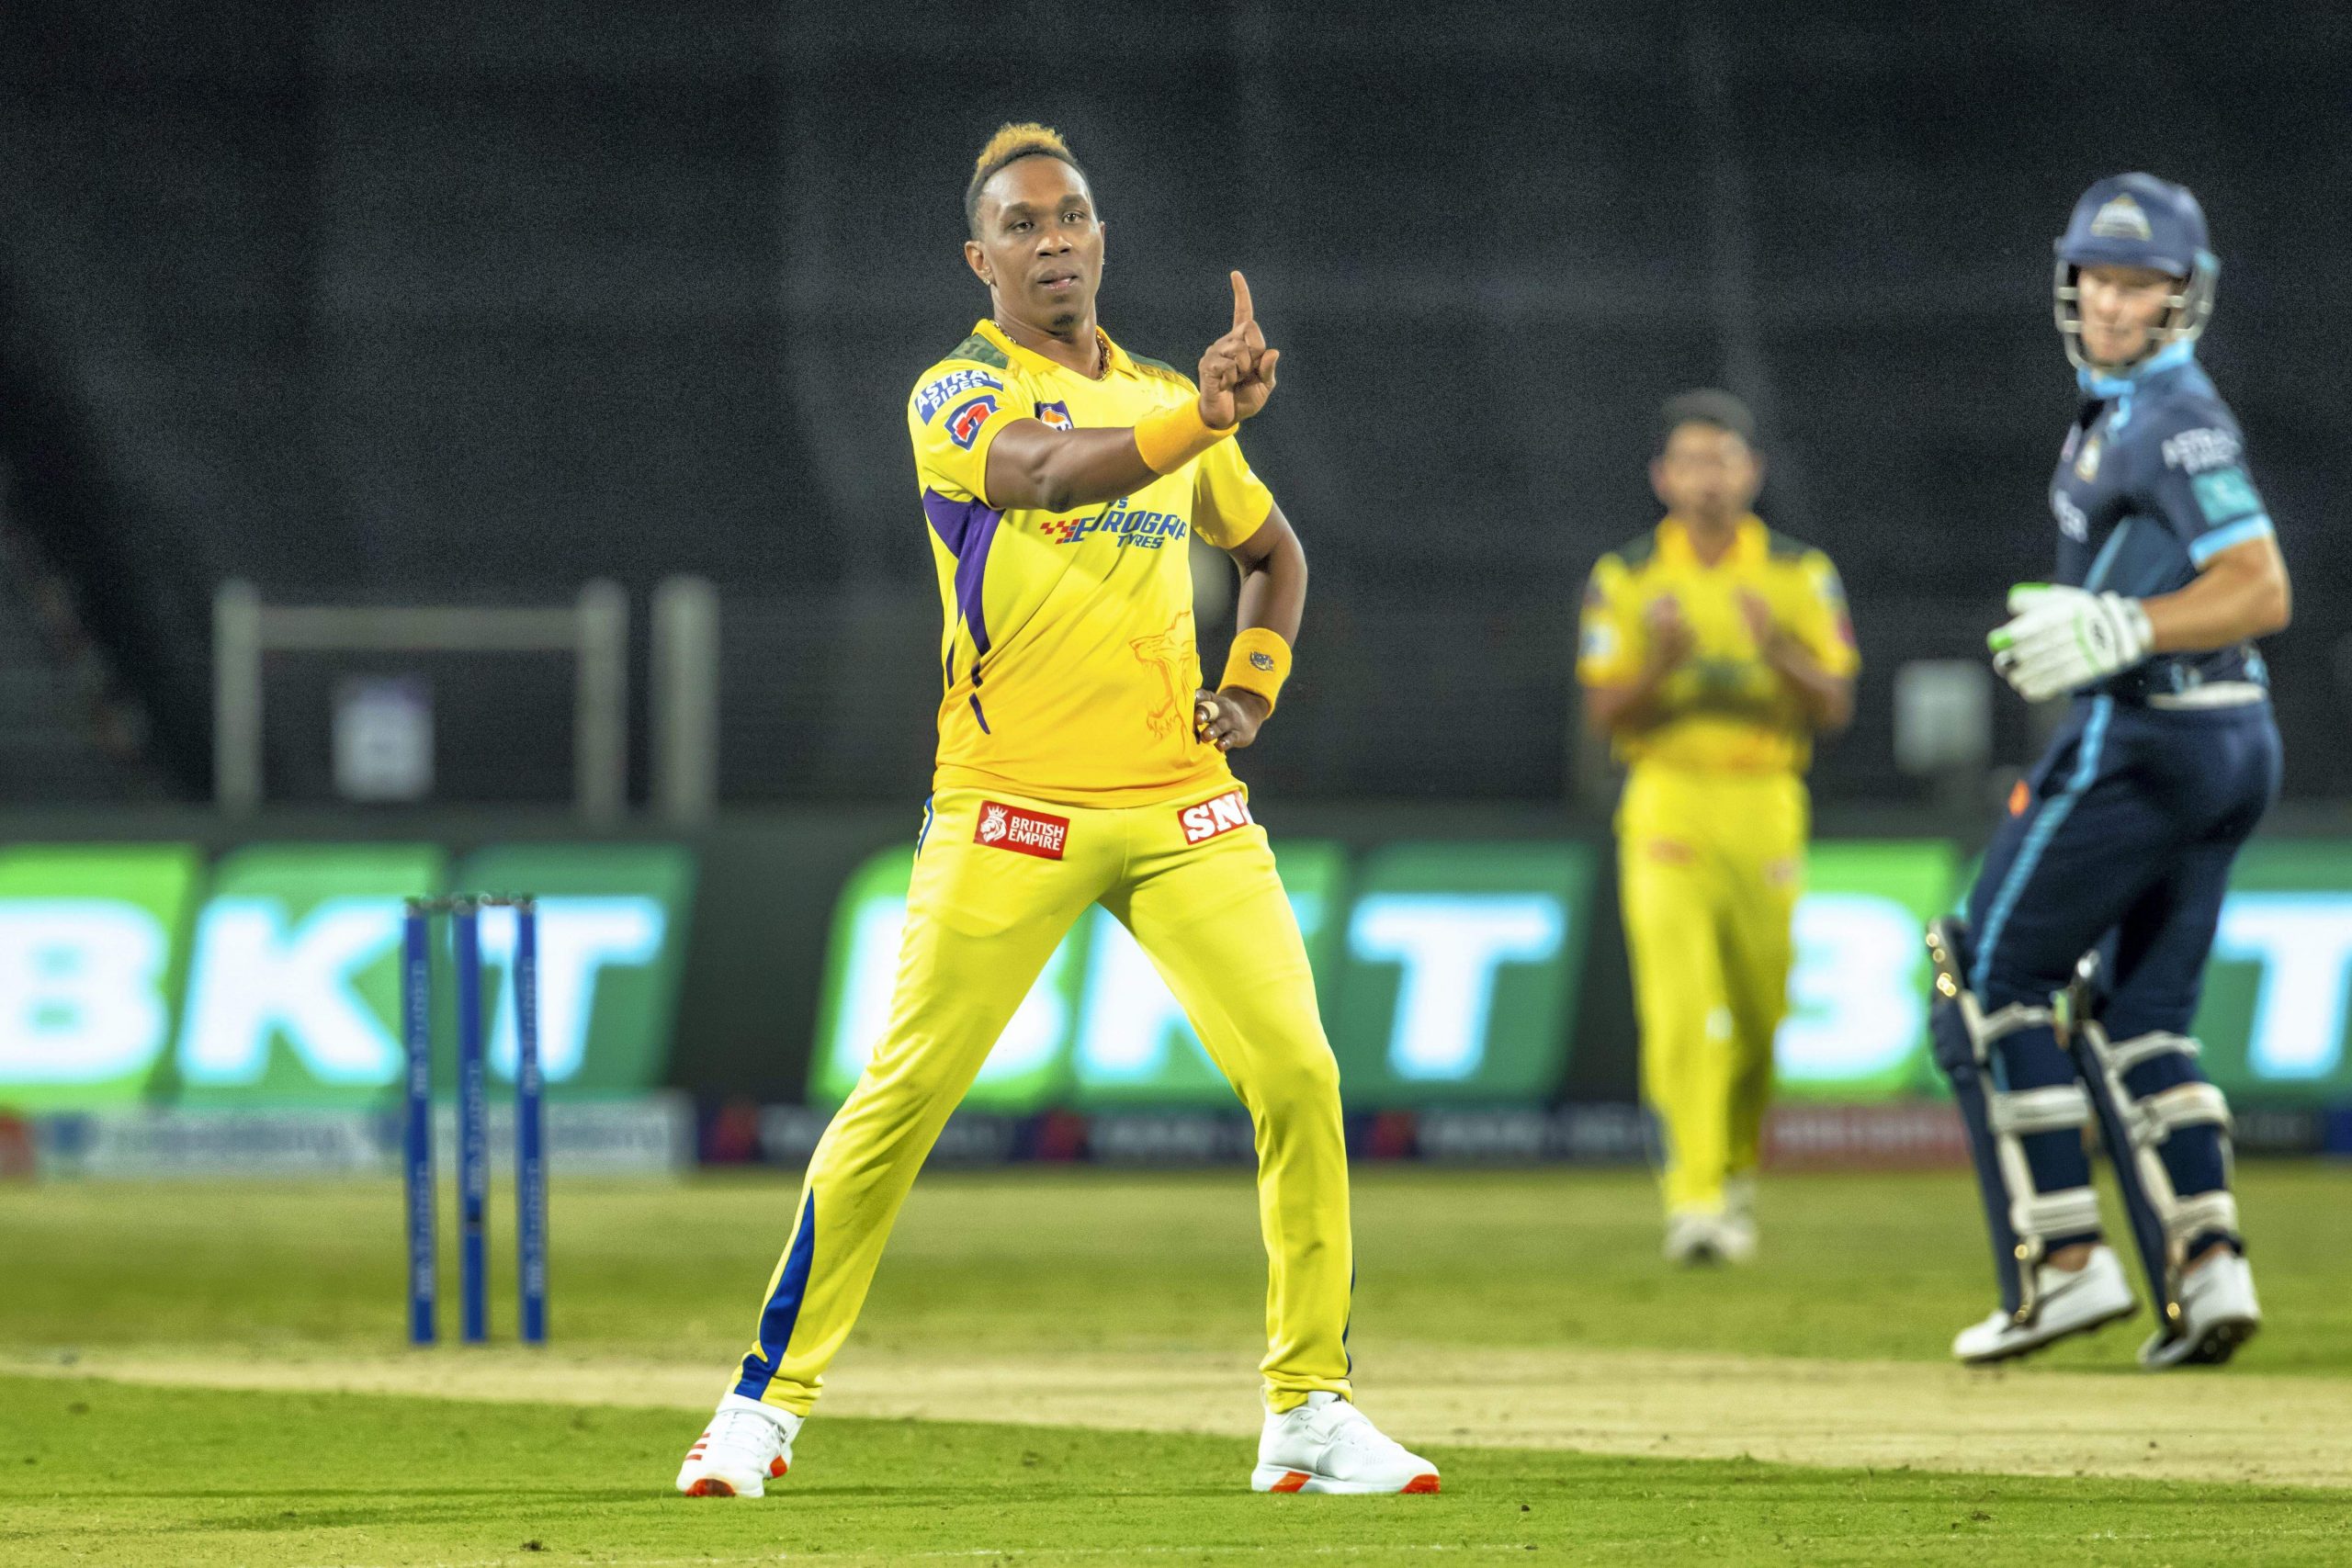 IPL 2022: Dwayne Bravo becomes the highest wicket-taker for CSK franchise